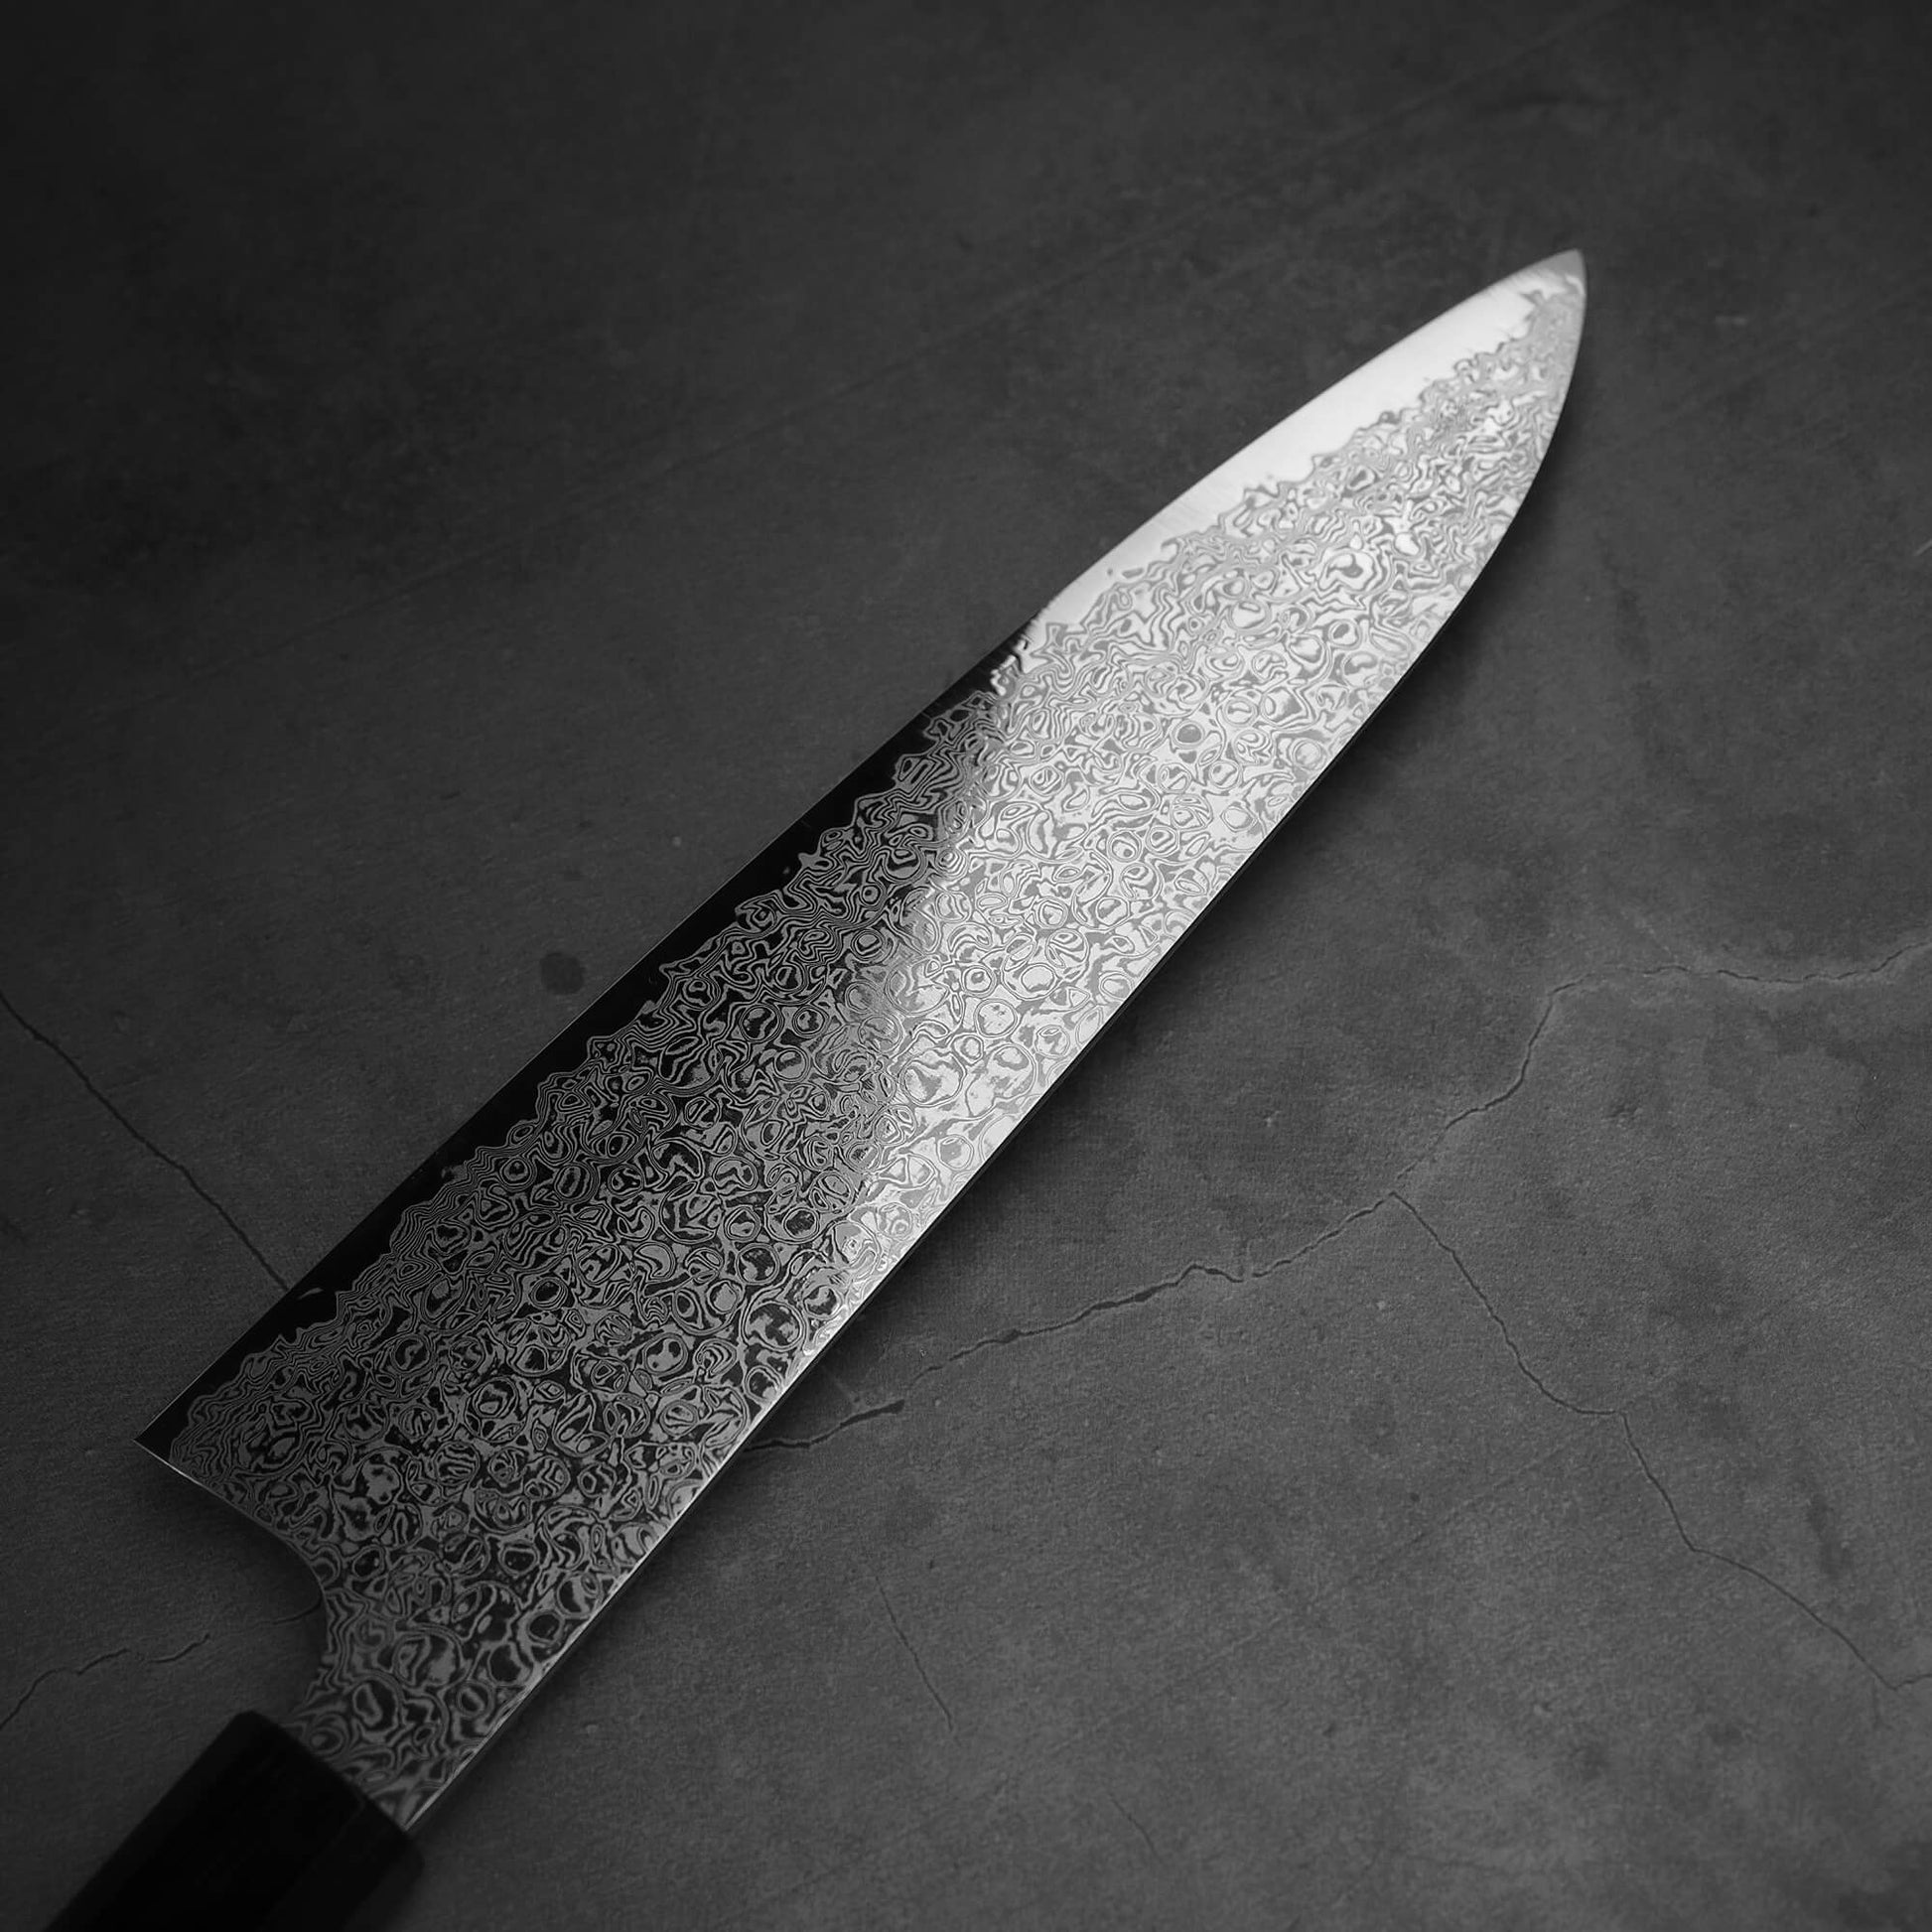 Top view of the blade of Hatsukokoro ginsan damascus gyuto 210mm. Image focuses on the left side of the blade